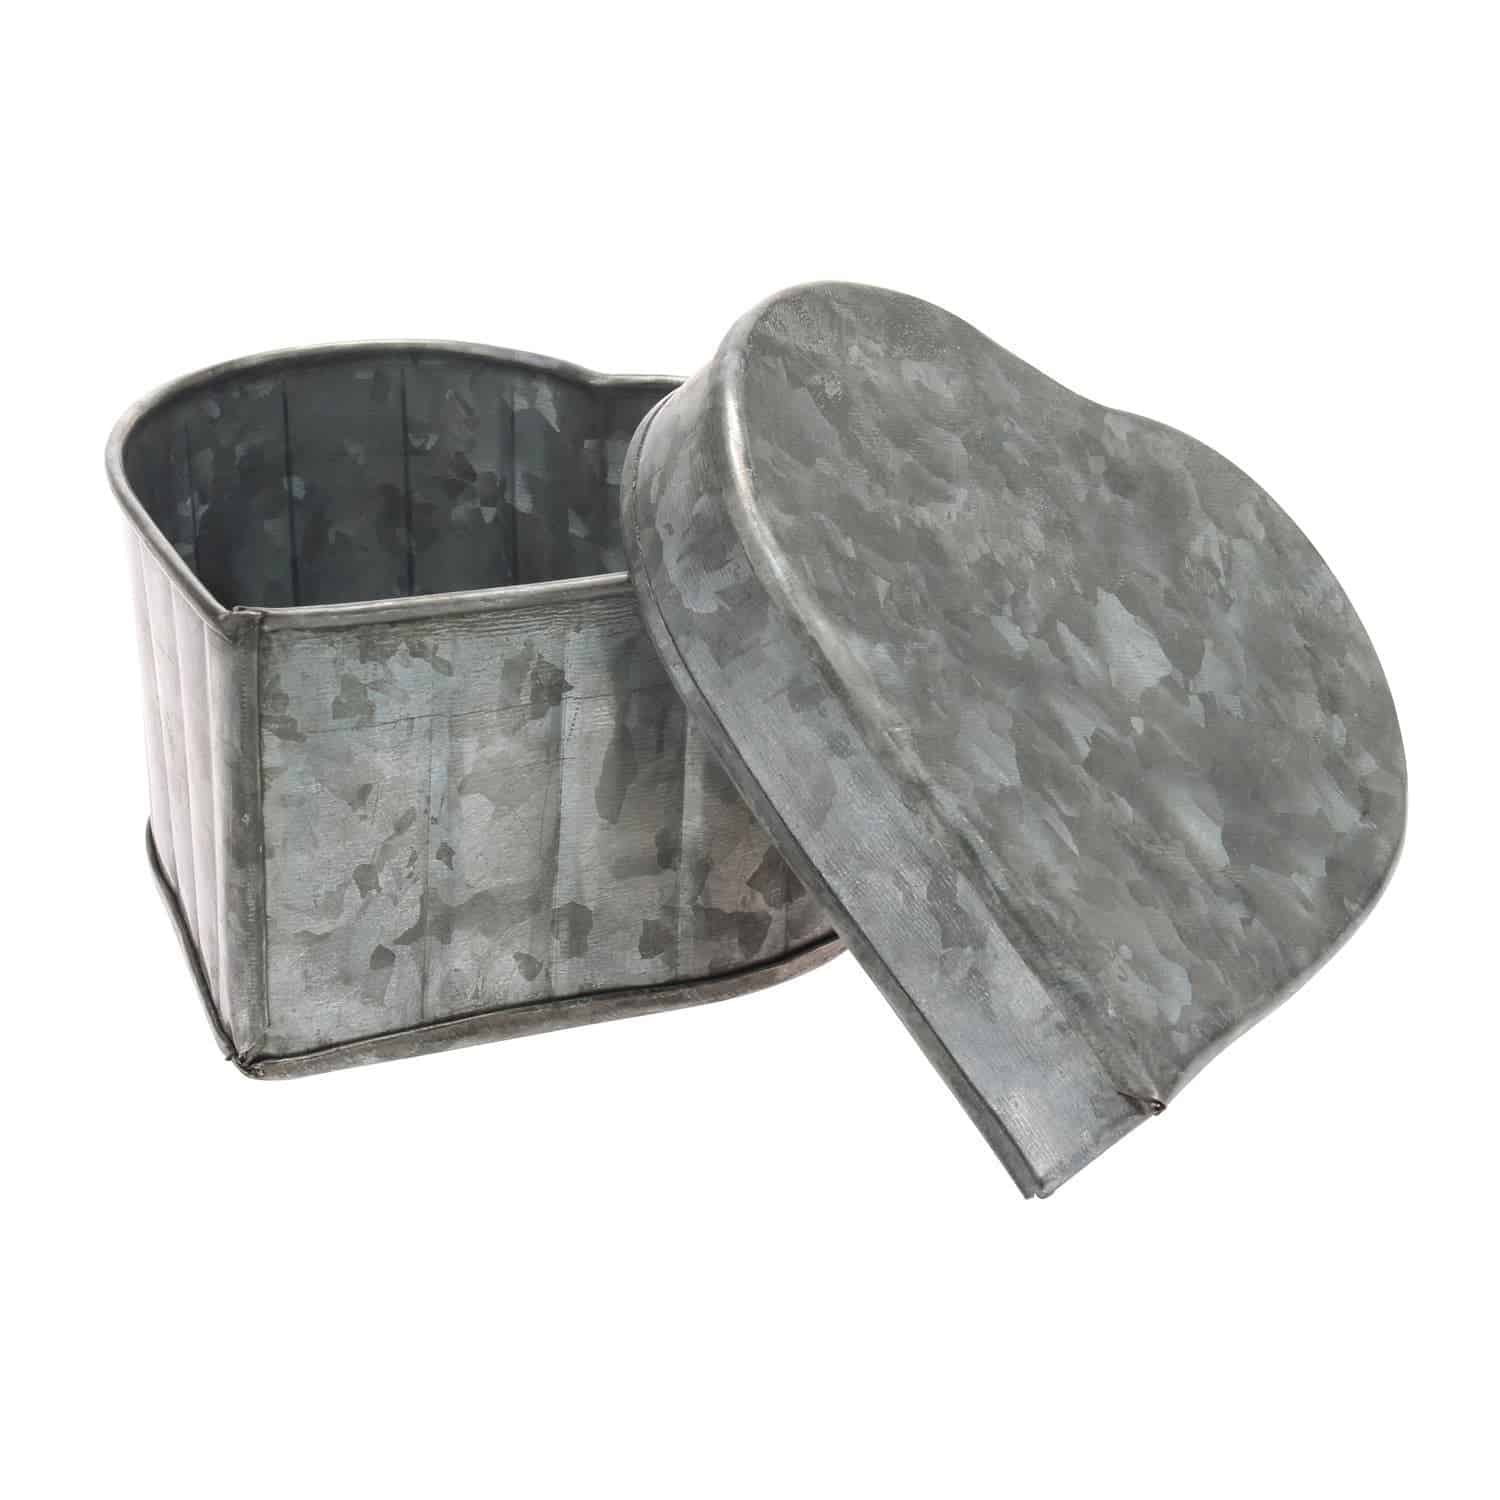 Awesome Crafting Blanks You Can Get on Amazon Prime : Galvanized Heart Container | www.thepinningmama.com